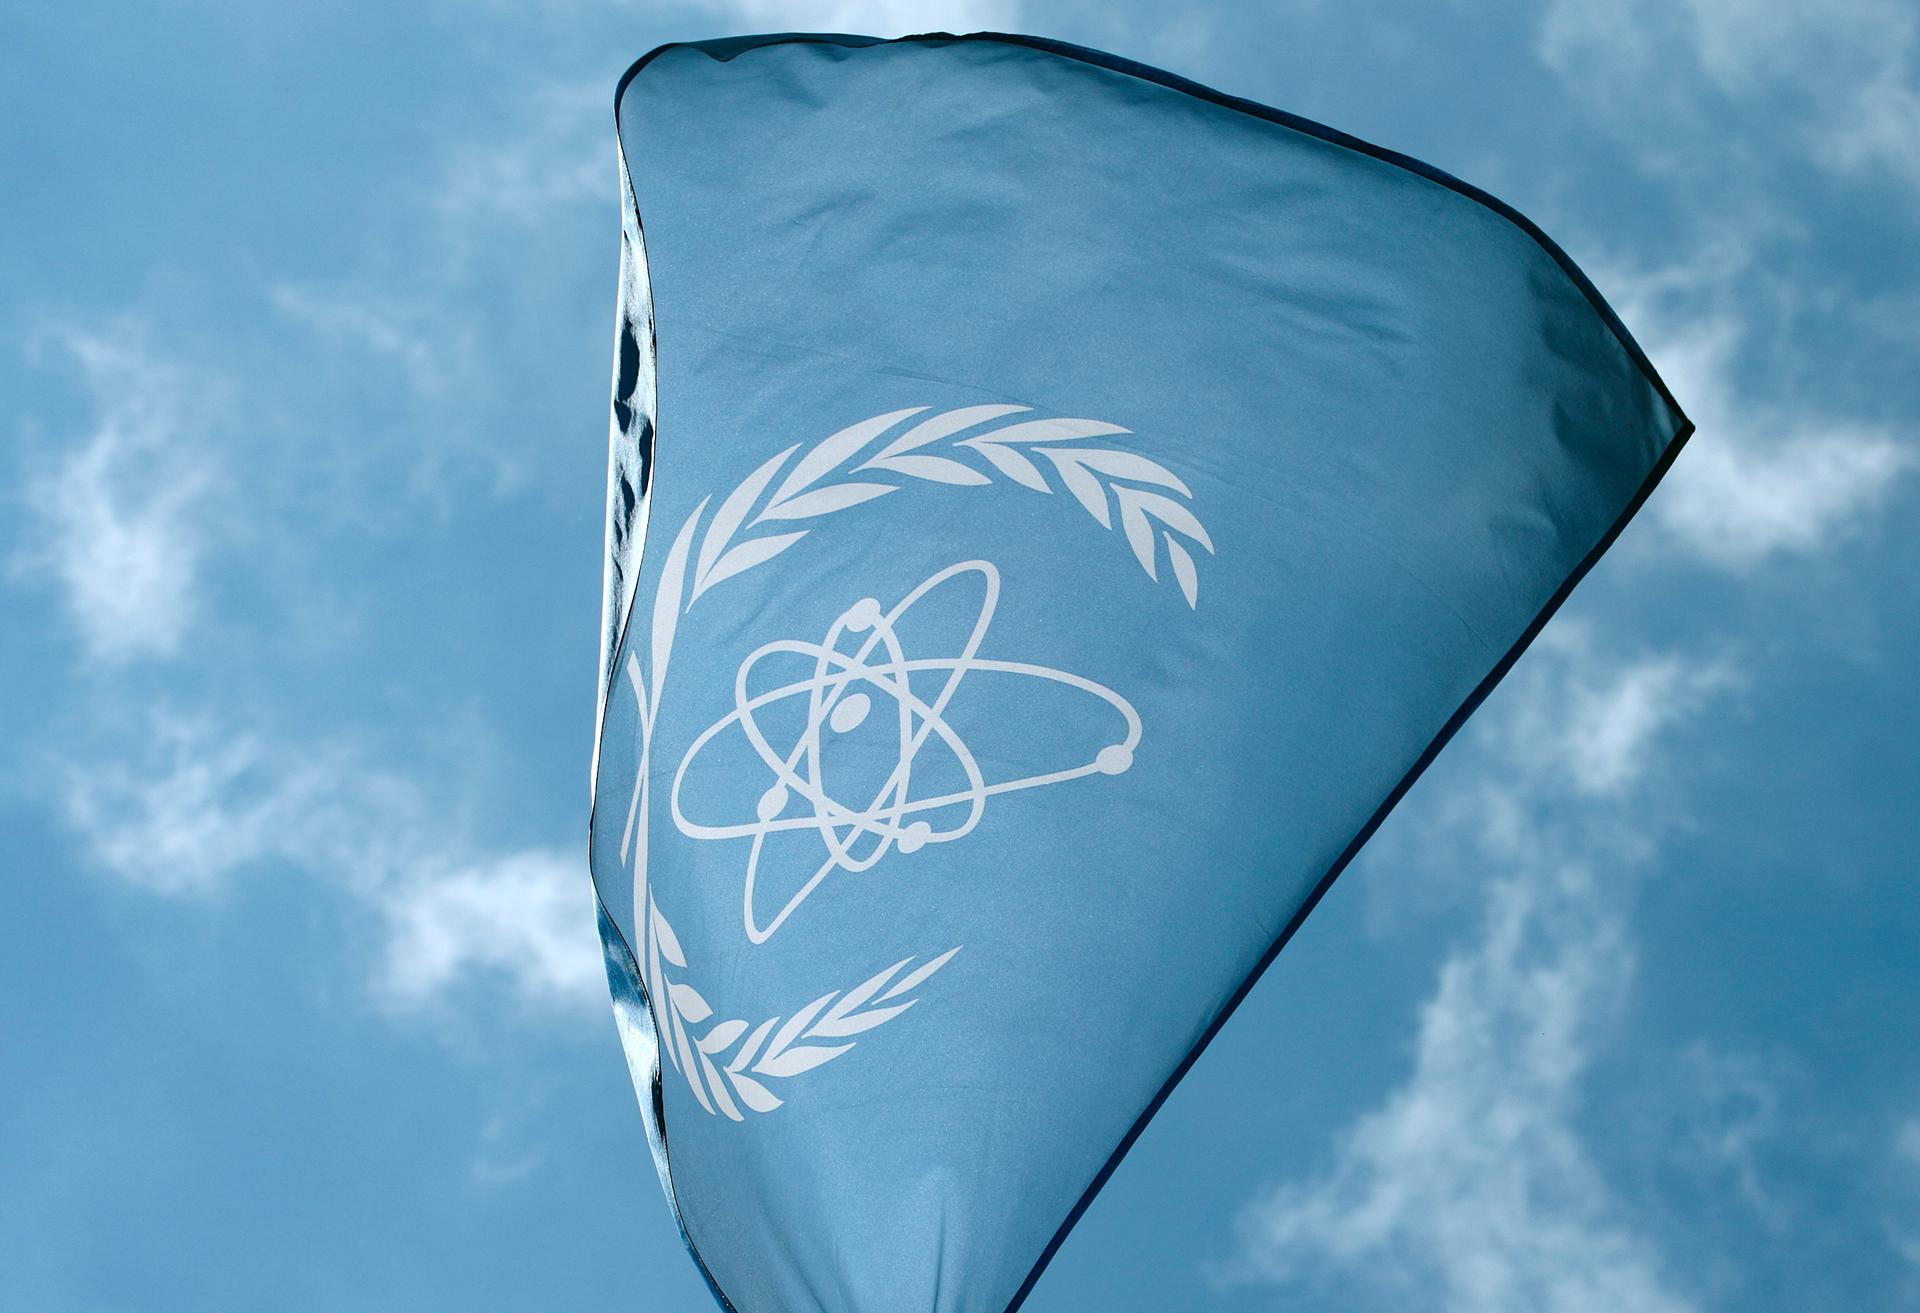 The flag of the International Atomic Energy Agency (IAEA) flies in front of its headquarters in Vienna, Austria, May 28, 2015